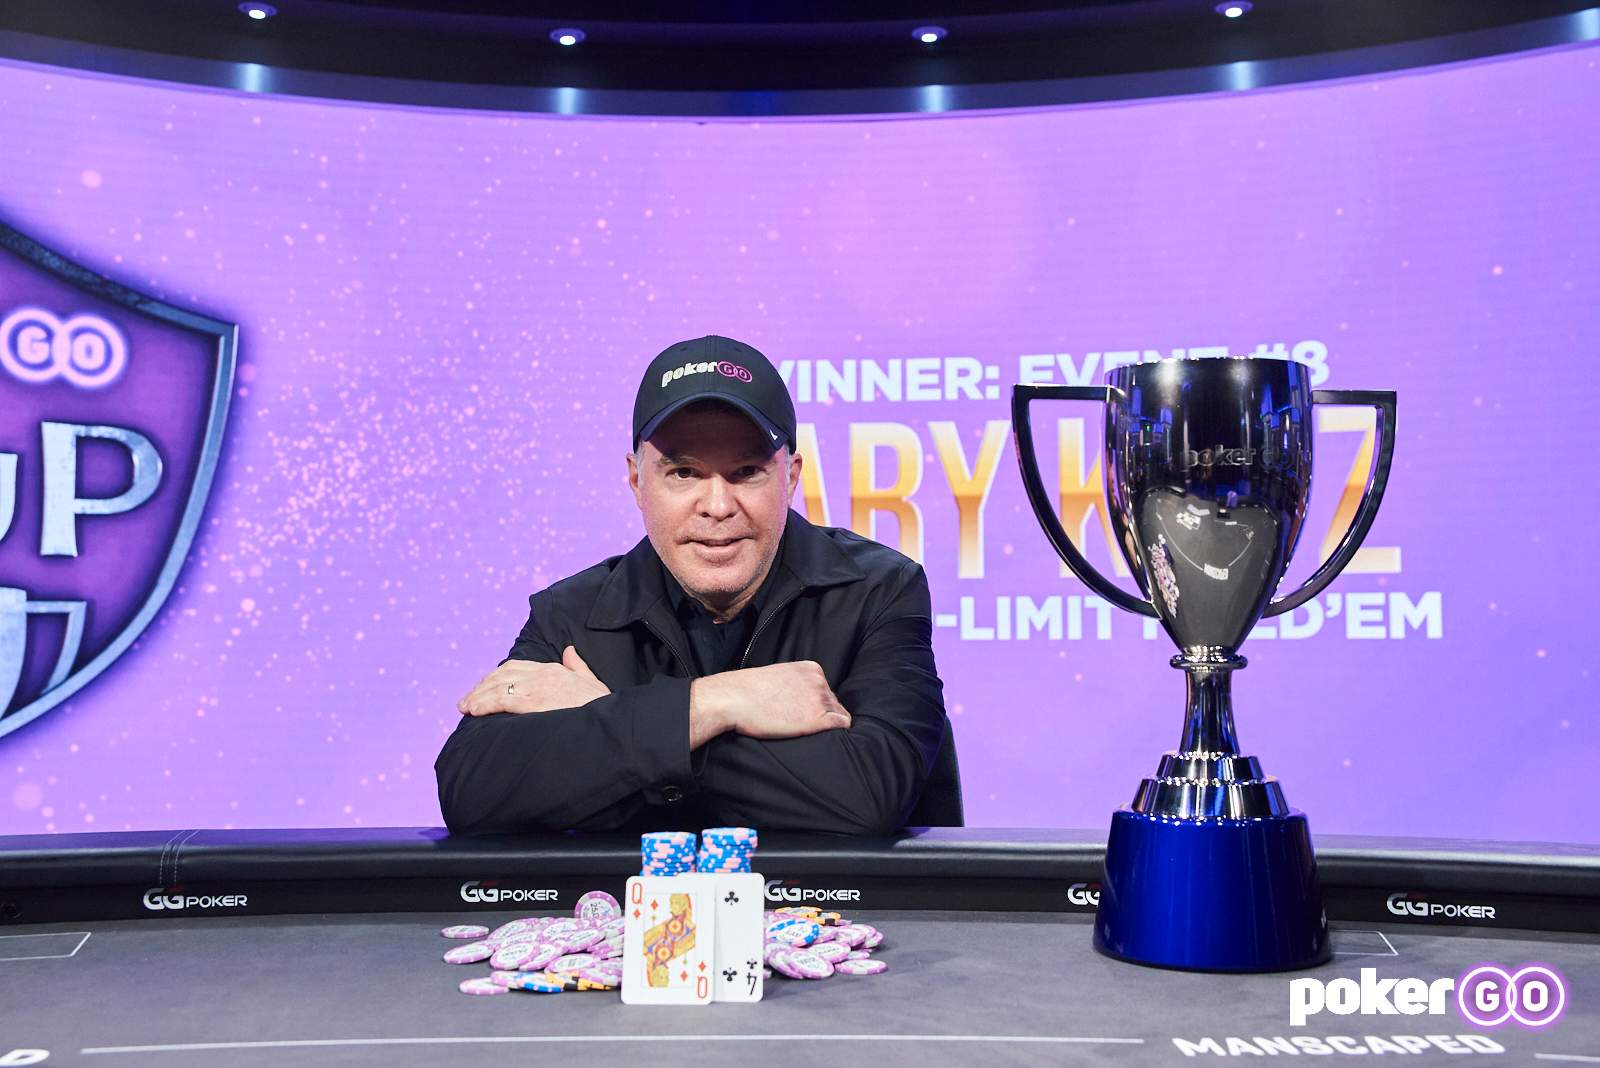 Cary Katz Wins 2021 PokerGO Cup Finale for $1,058,000